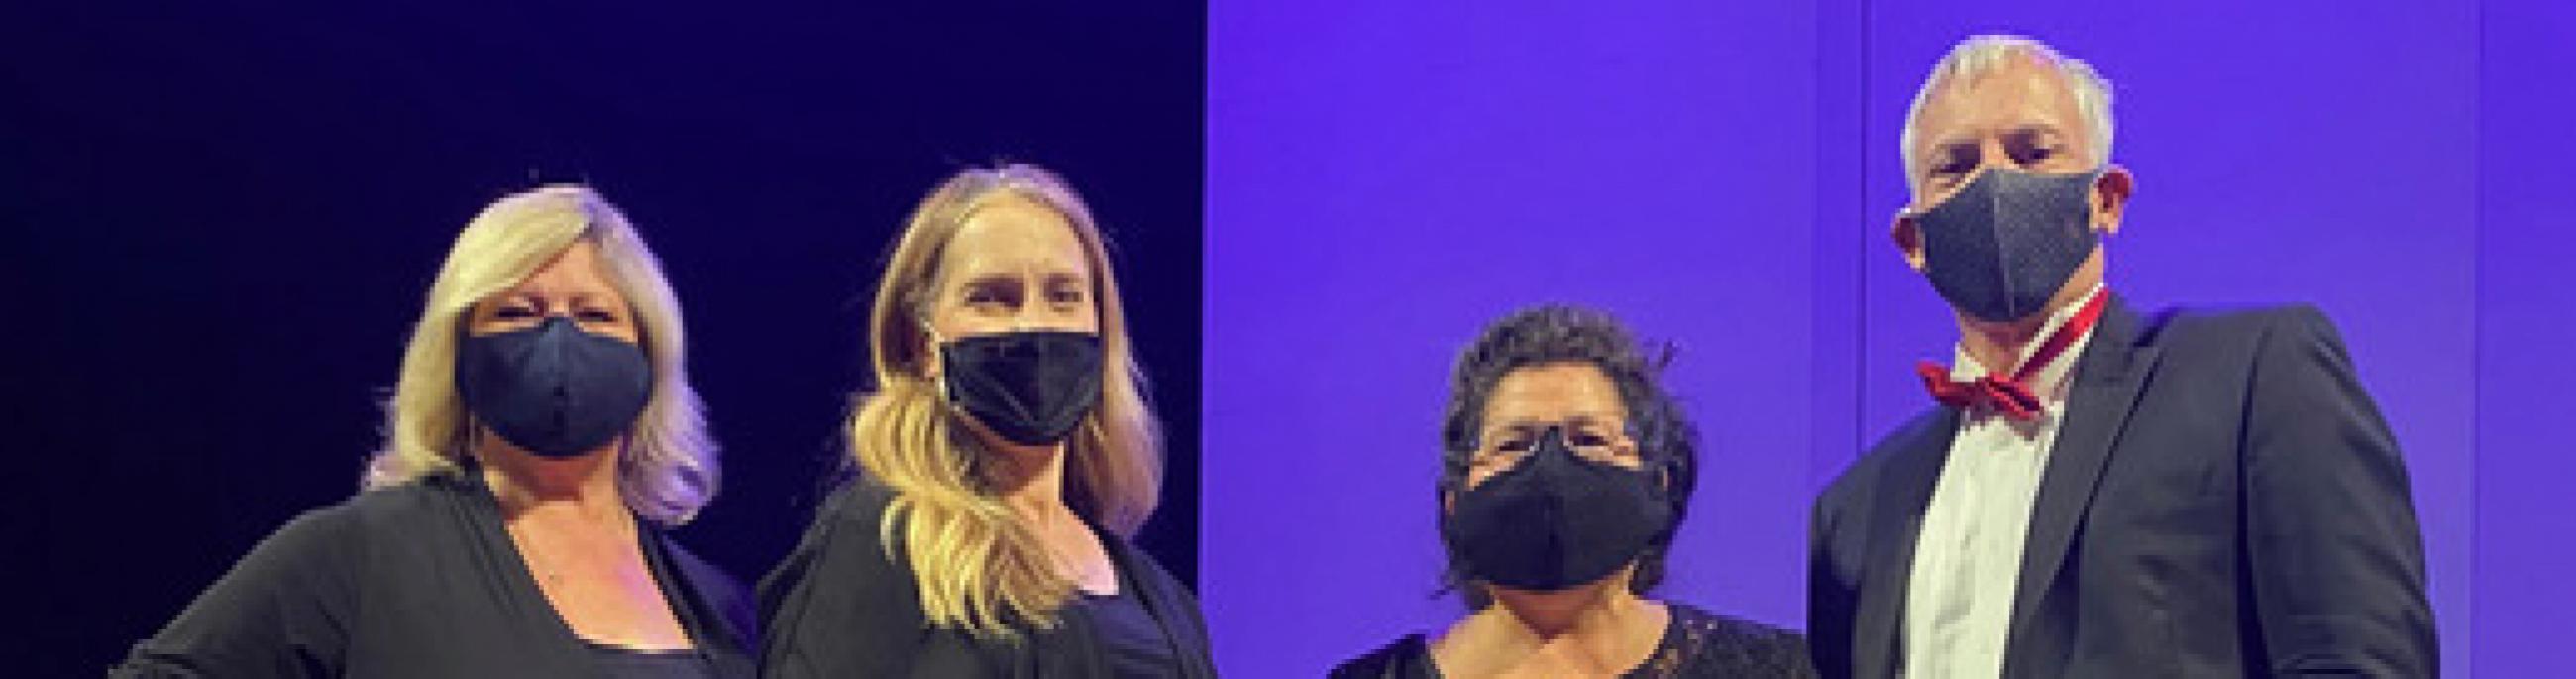 Four musicians, dressed in formal wear and masks, pose in front of a purple backdrop.